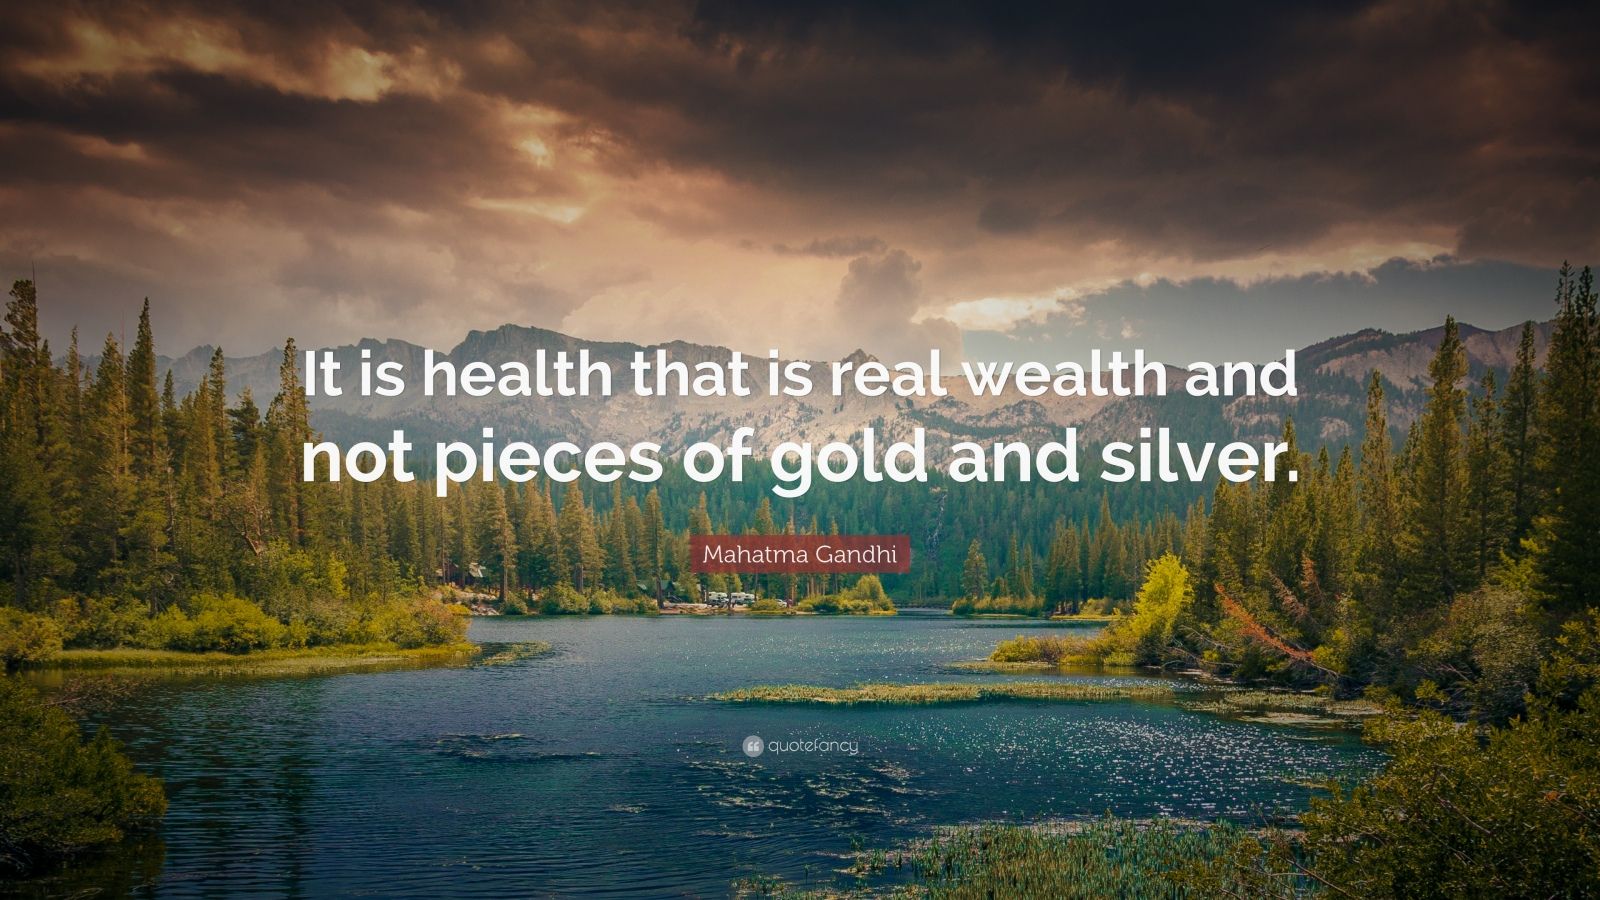 Mahatma Gandhi Quote: “It is health that is real wealth and not pieces